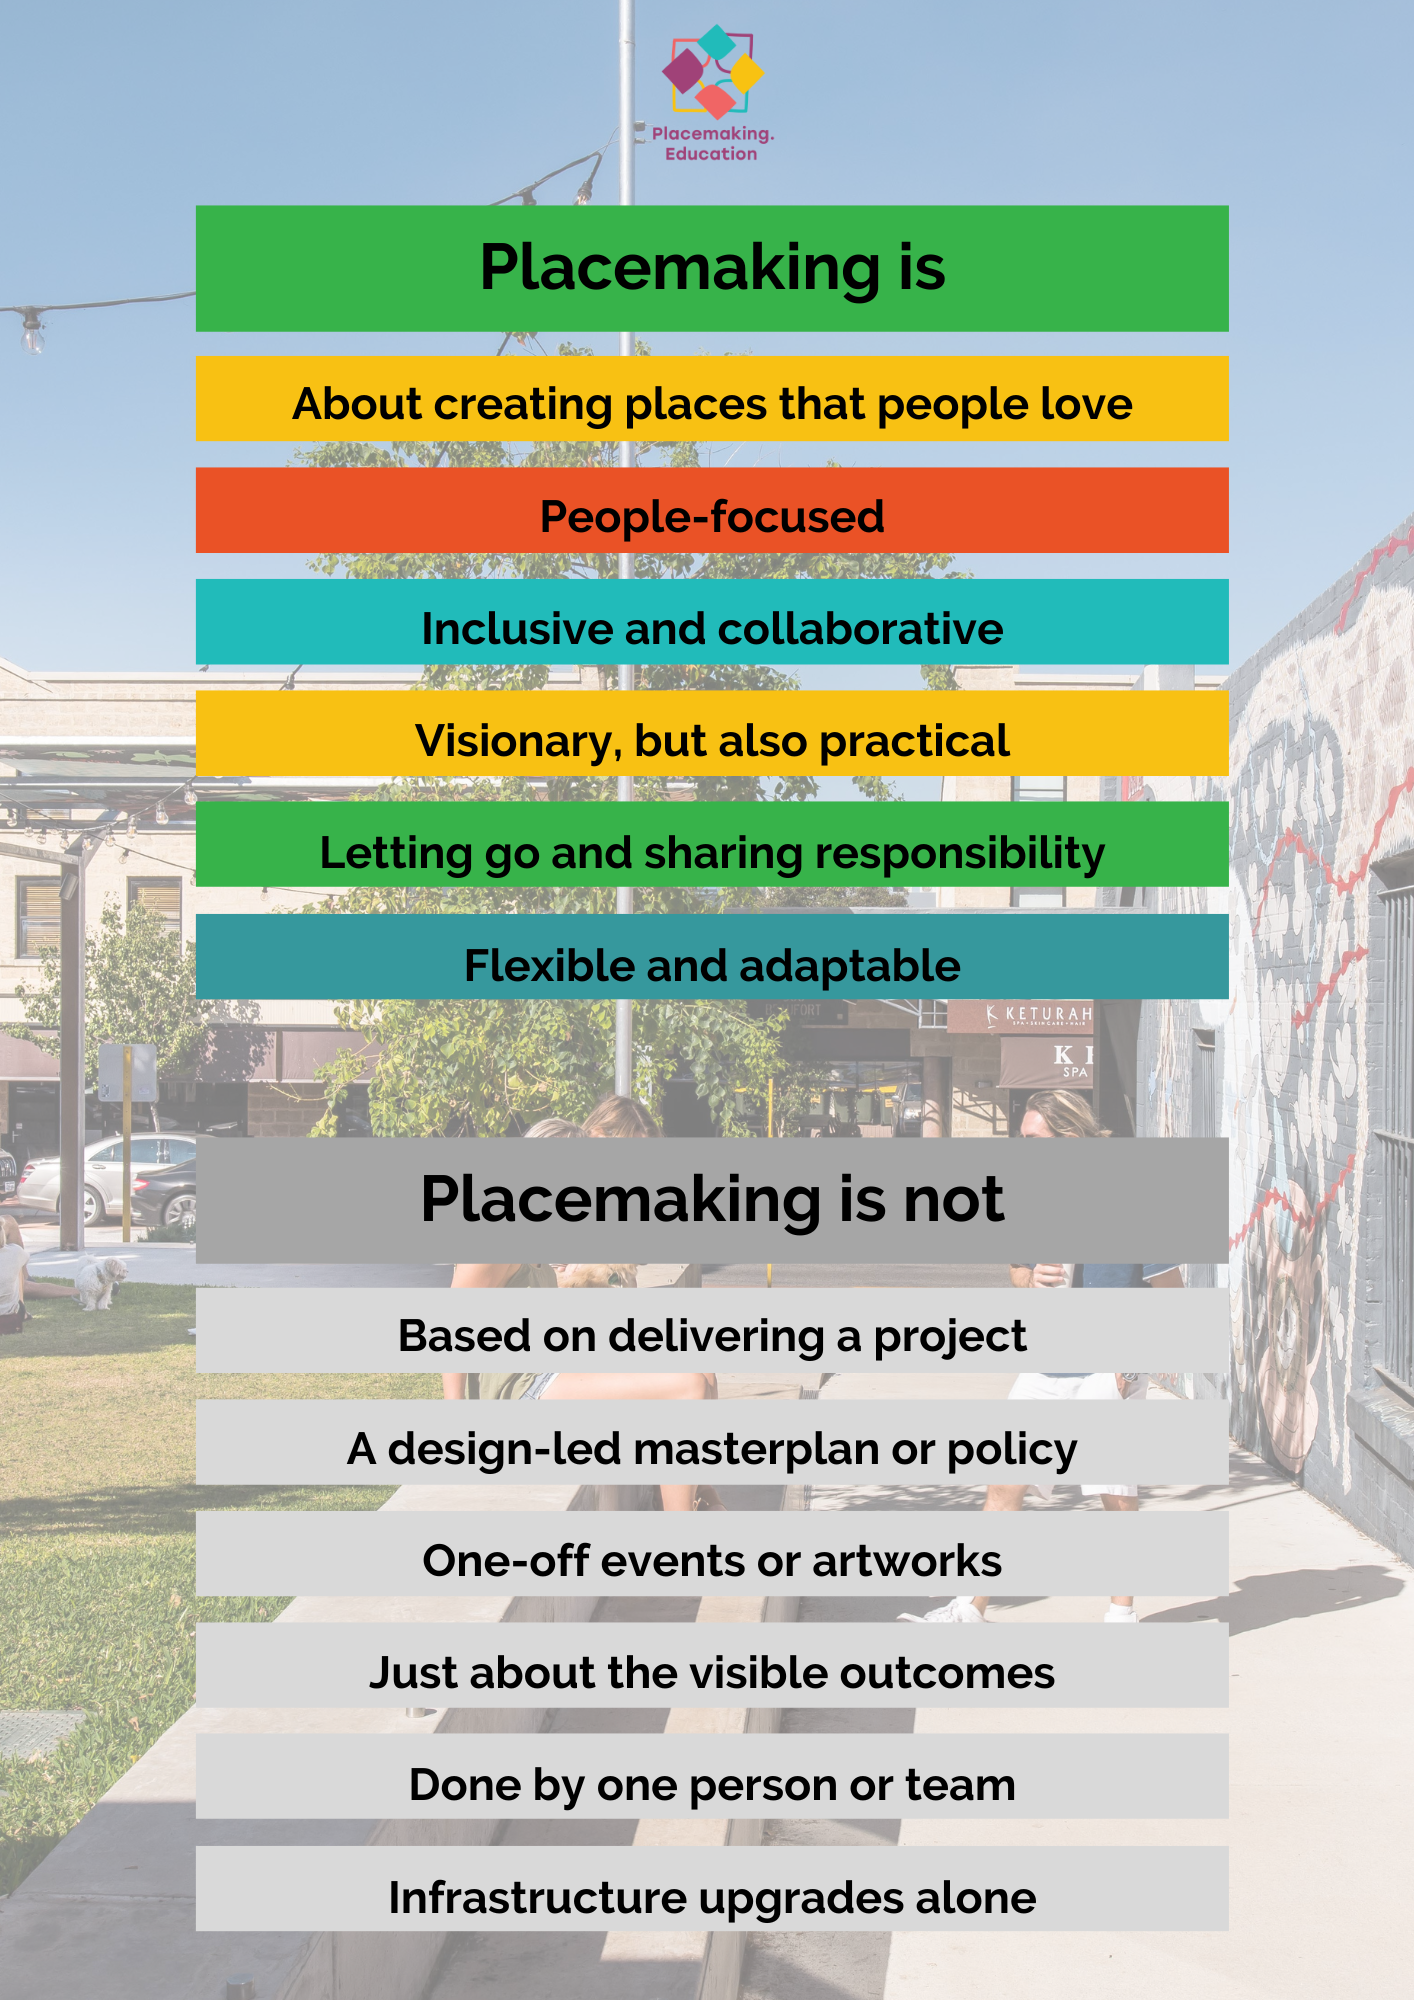 Graphic showing that placemaking is: About creating places that people love People-focused Inclusive and collaborative Visionary, but also practical Letting go and sharing responsibility Flexible and adaptable. Placeamking is not: Based on delivering a project A design-led masterplan or policy One-off events or artworks Just about the visible outcomes Done by one person or team Infrastructure upgrades alone